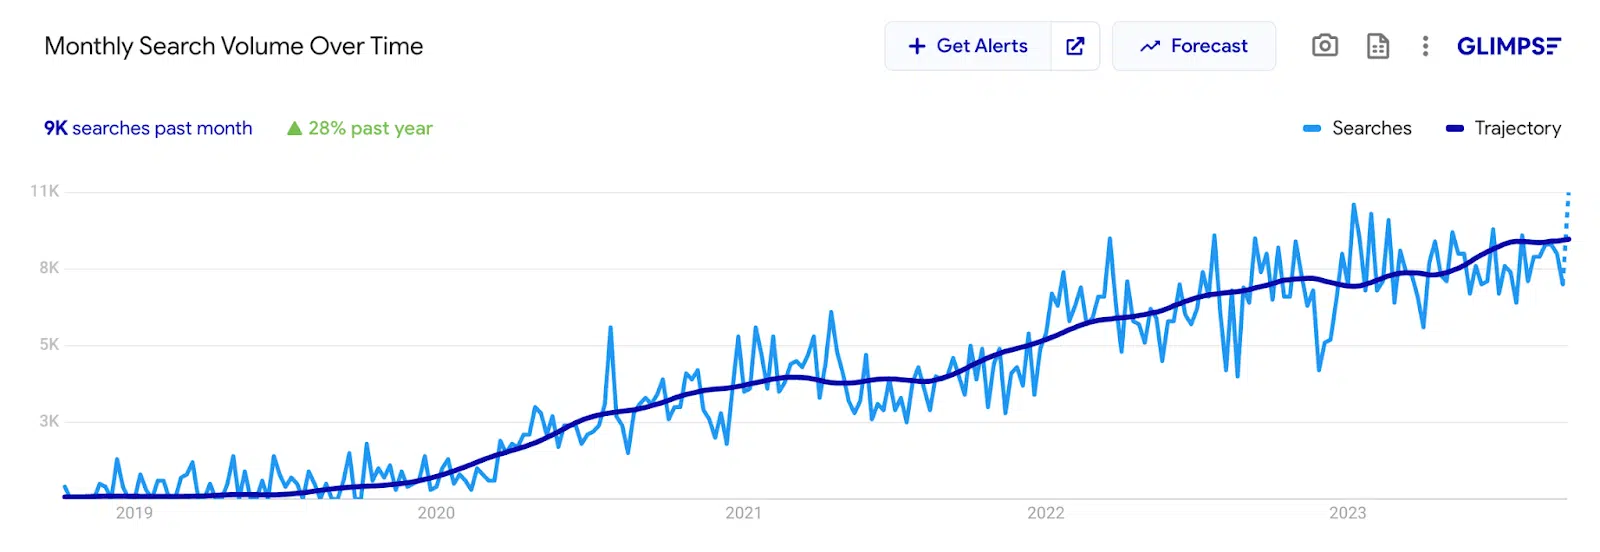 Monthly search volume over time